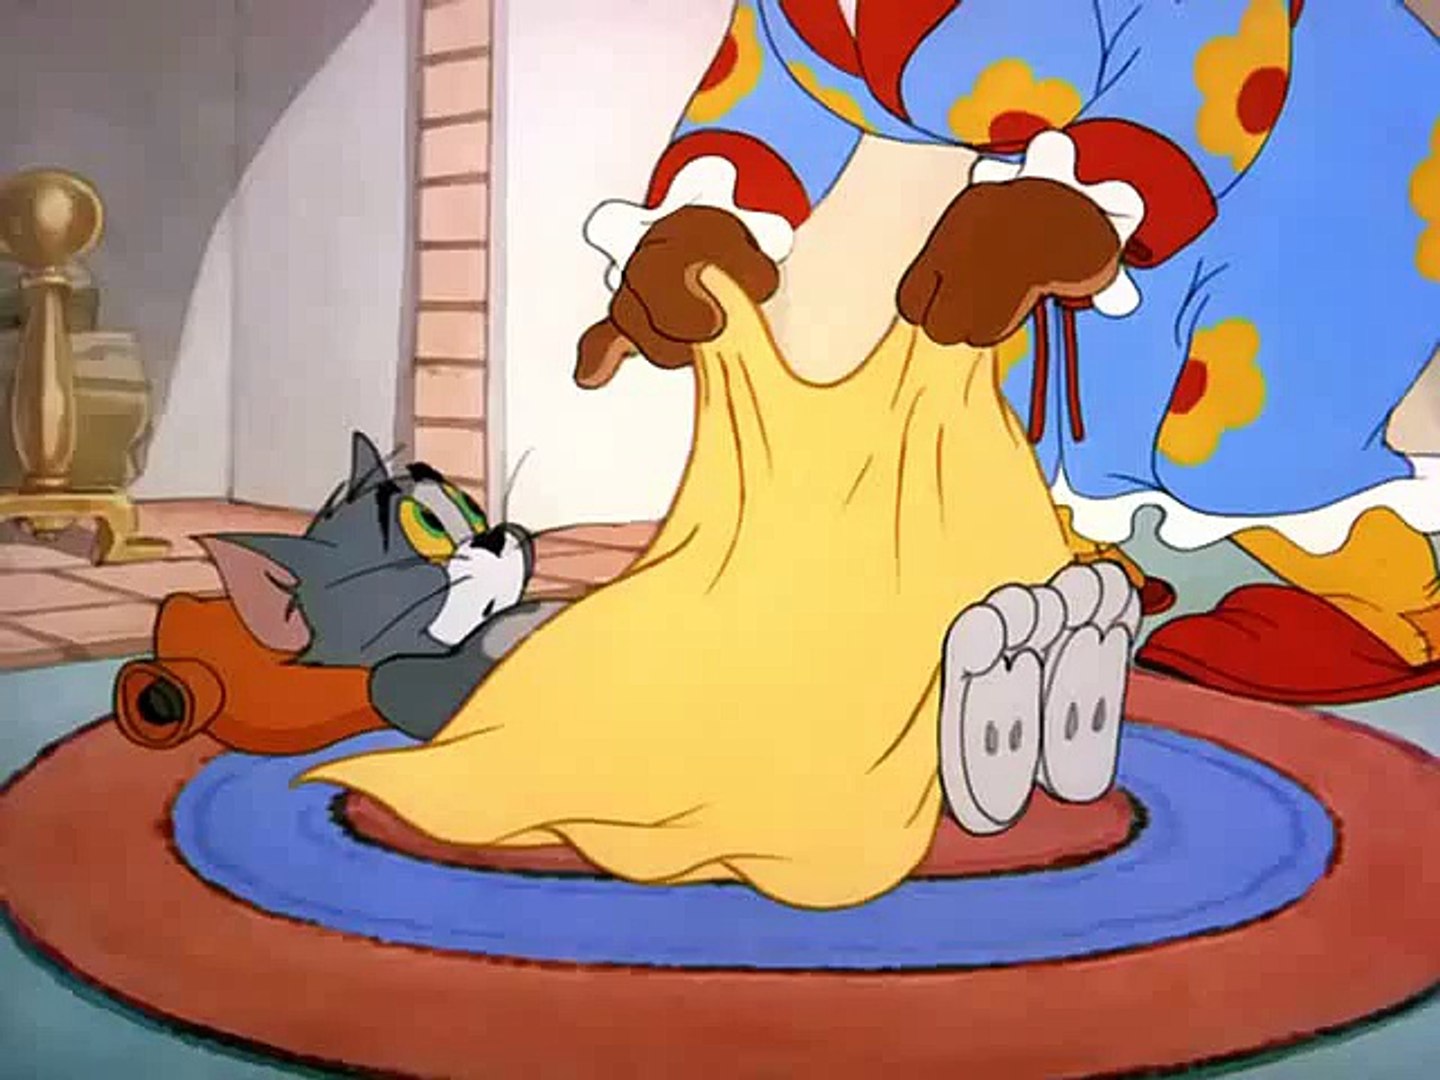 Tom And Jerry, ep 39 - Polka Dot Puss(1949) - video Dailymotion